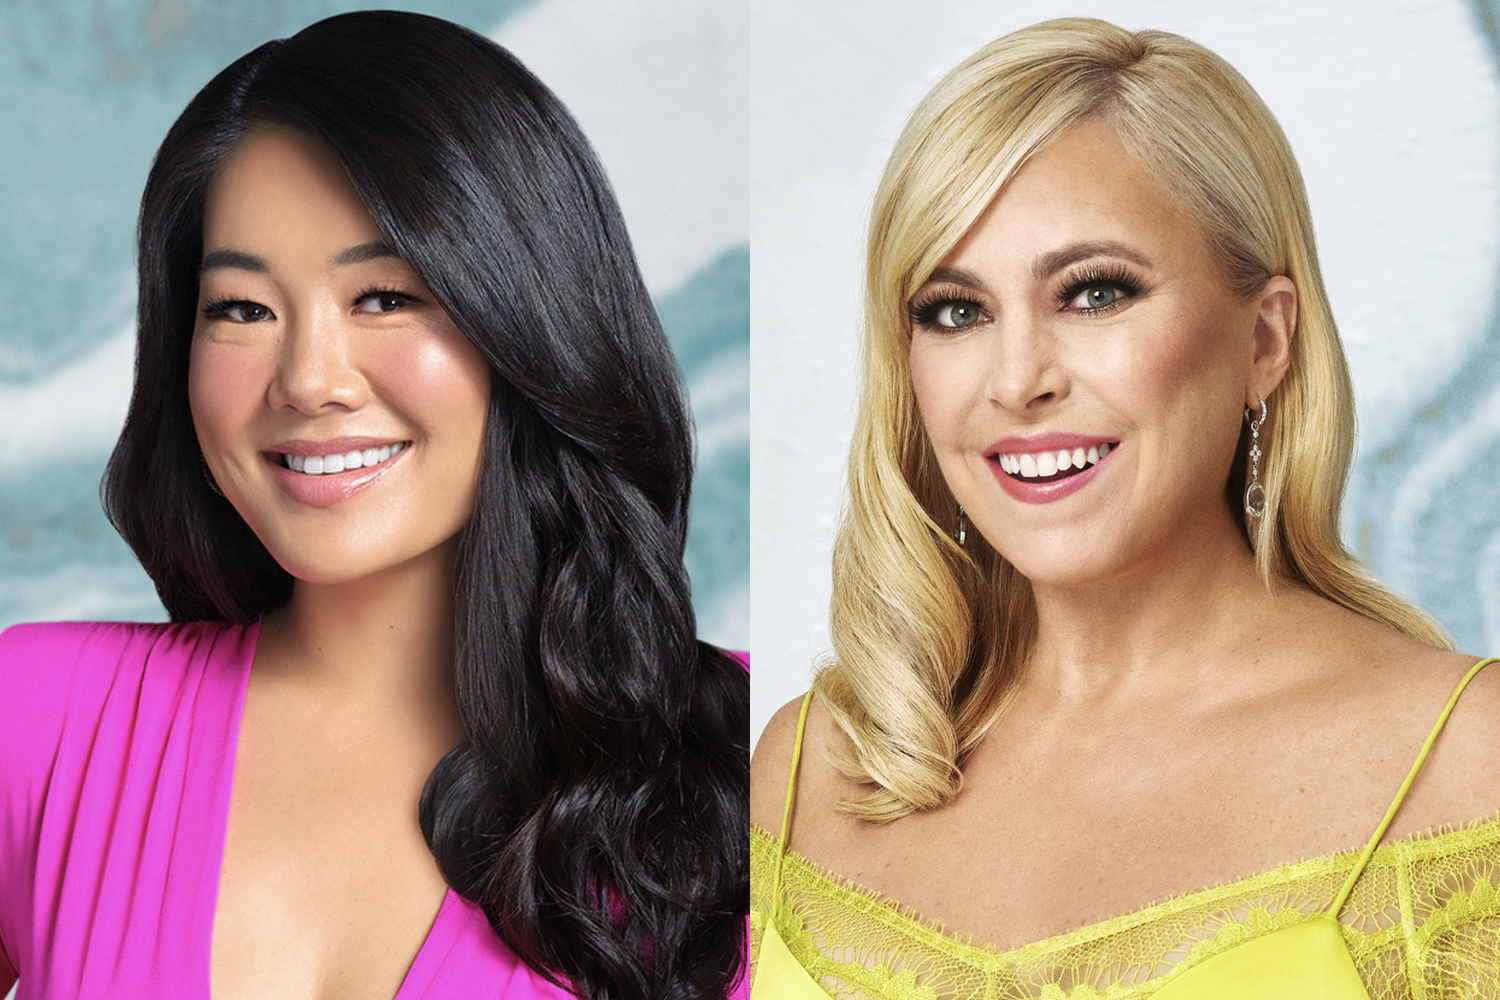 ‘RHOBH’: Crystal Kung Minkoff Reacts to Sutton Stracke Apology After Feud